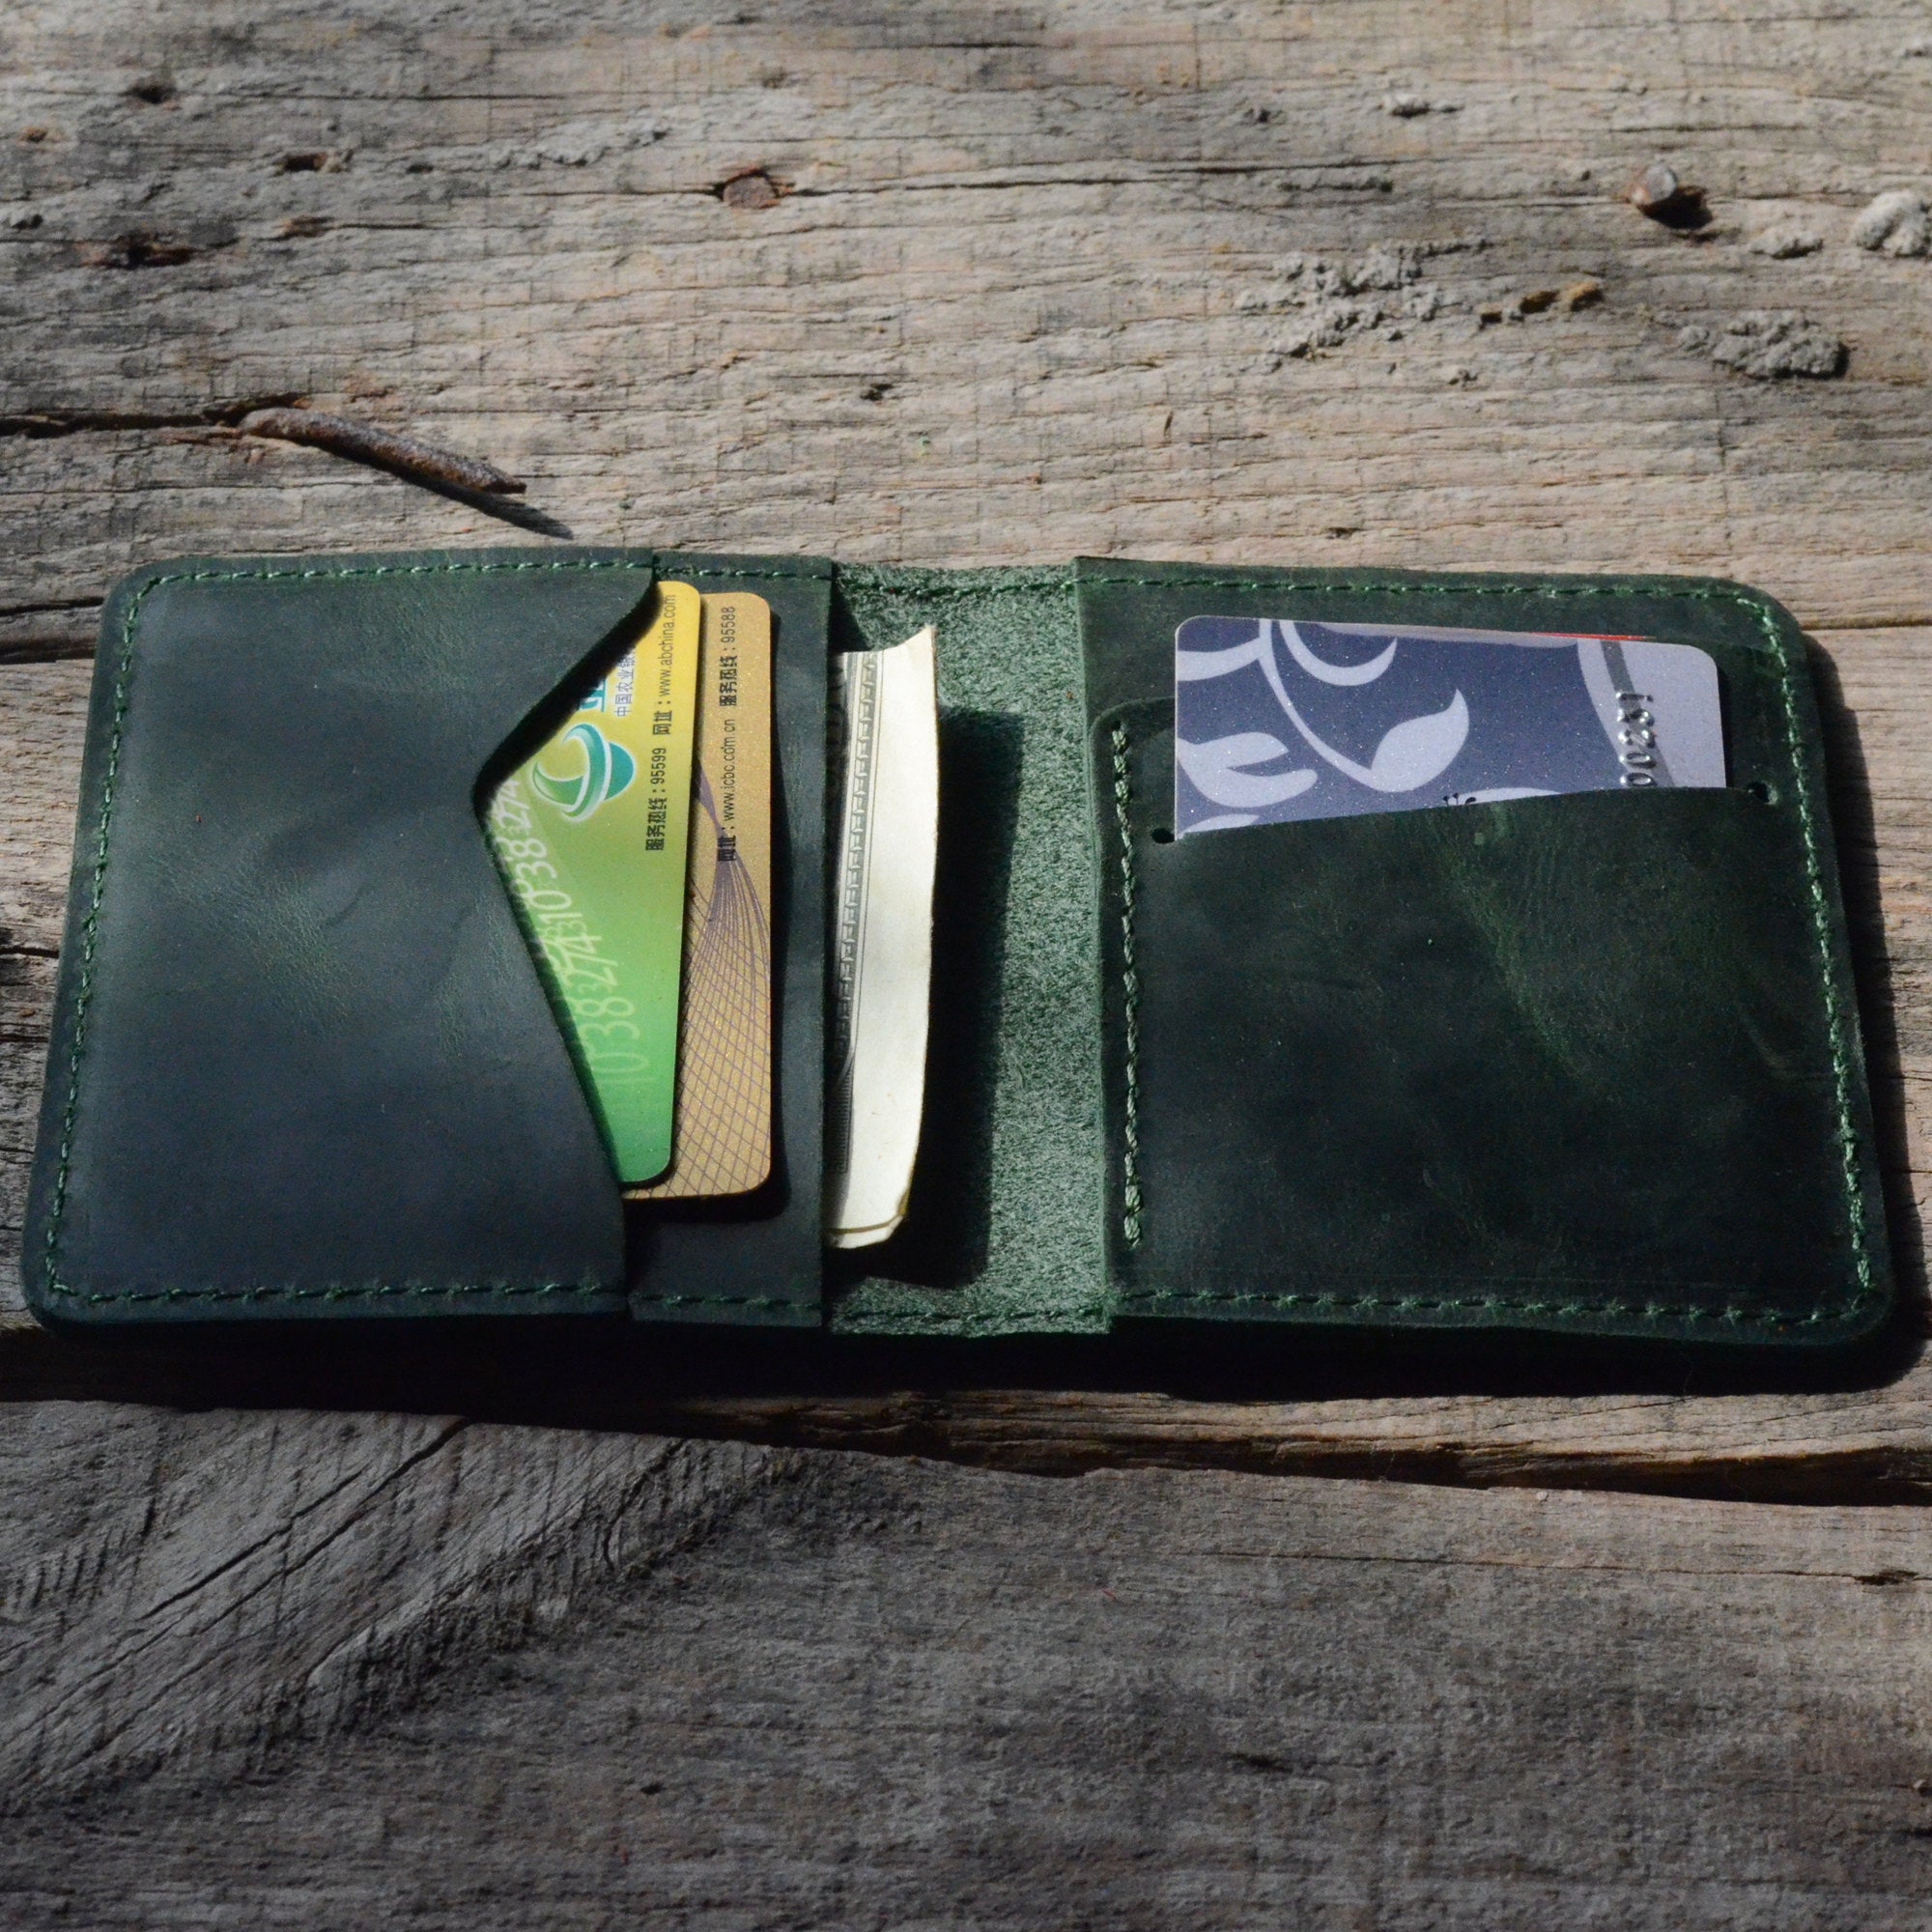 Fossil Men's Ethan Snap Leather Bifold Wallet in Green for Men